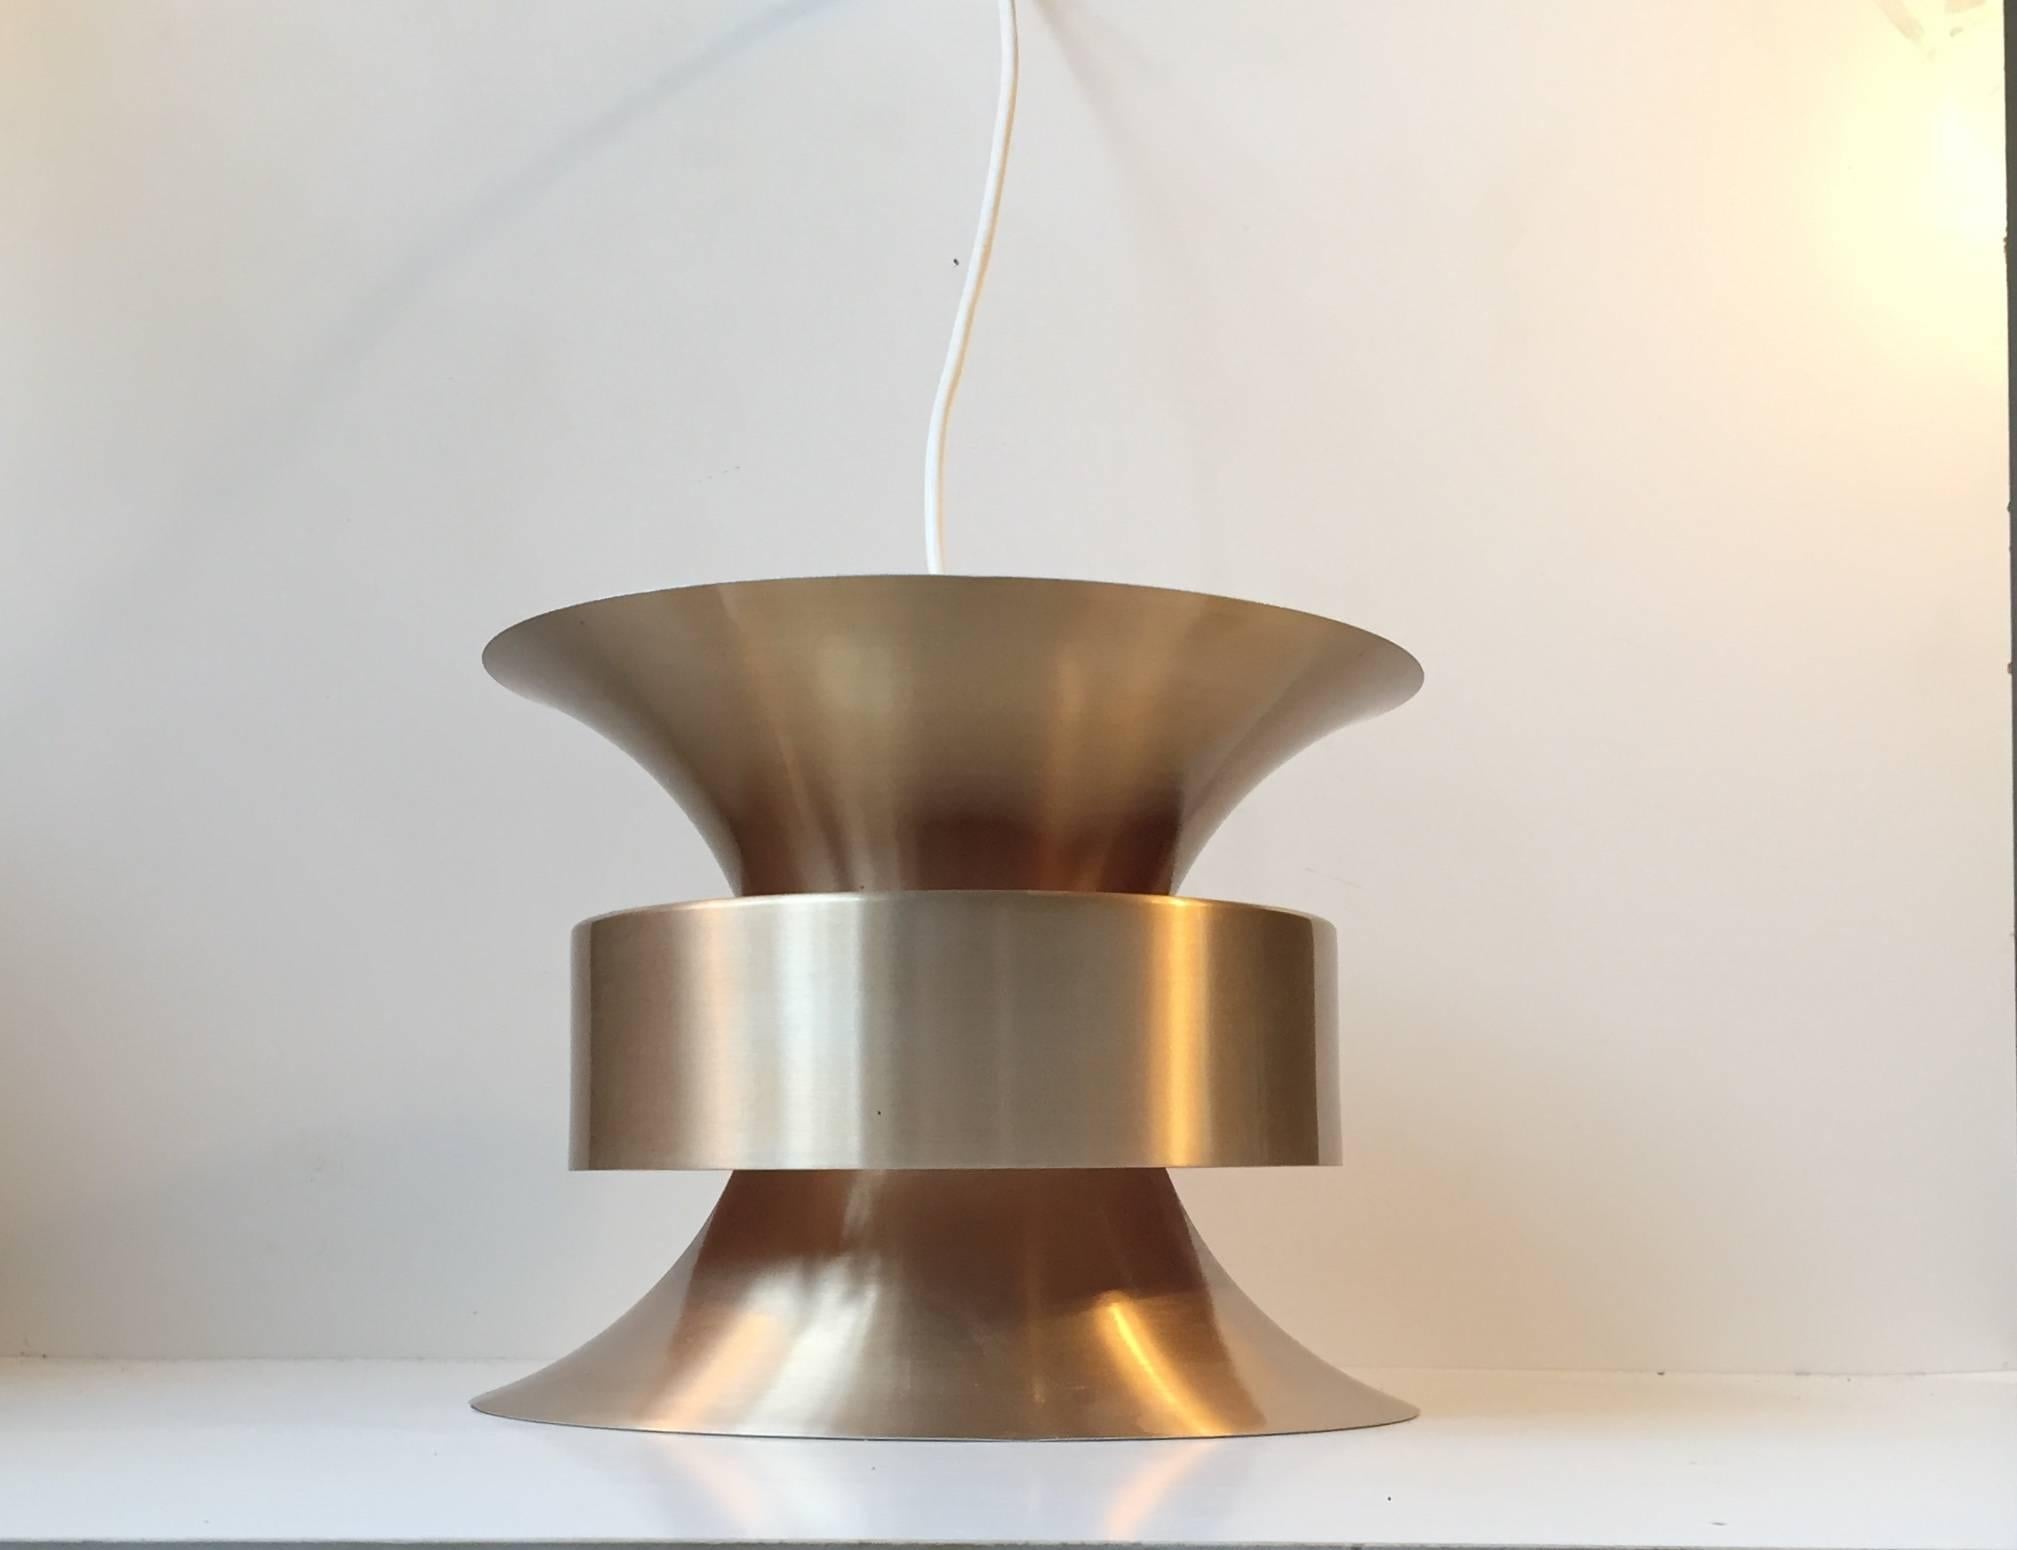 This pendant light was designed by Sigurd Lindkvist, alias Carl Thore as part of the Trava series for Granhaga Metallindustri, Sweden. It was manufactured in the 1960s-1970s, is made from brass-alloy aluminum, and has orange and white reflective